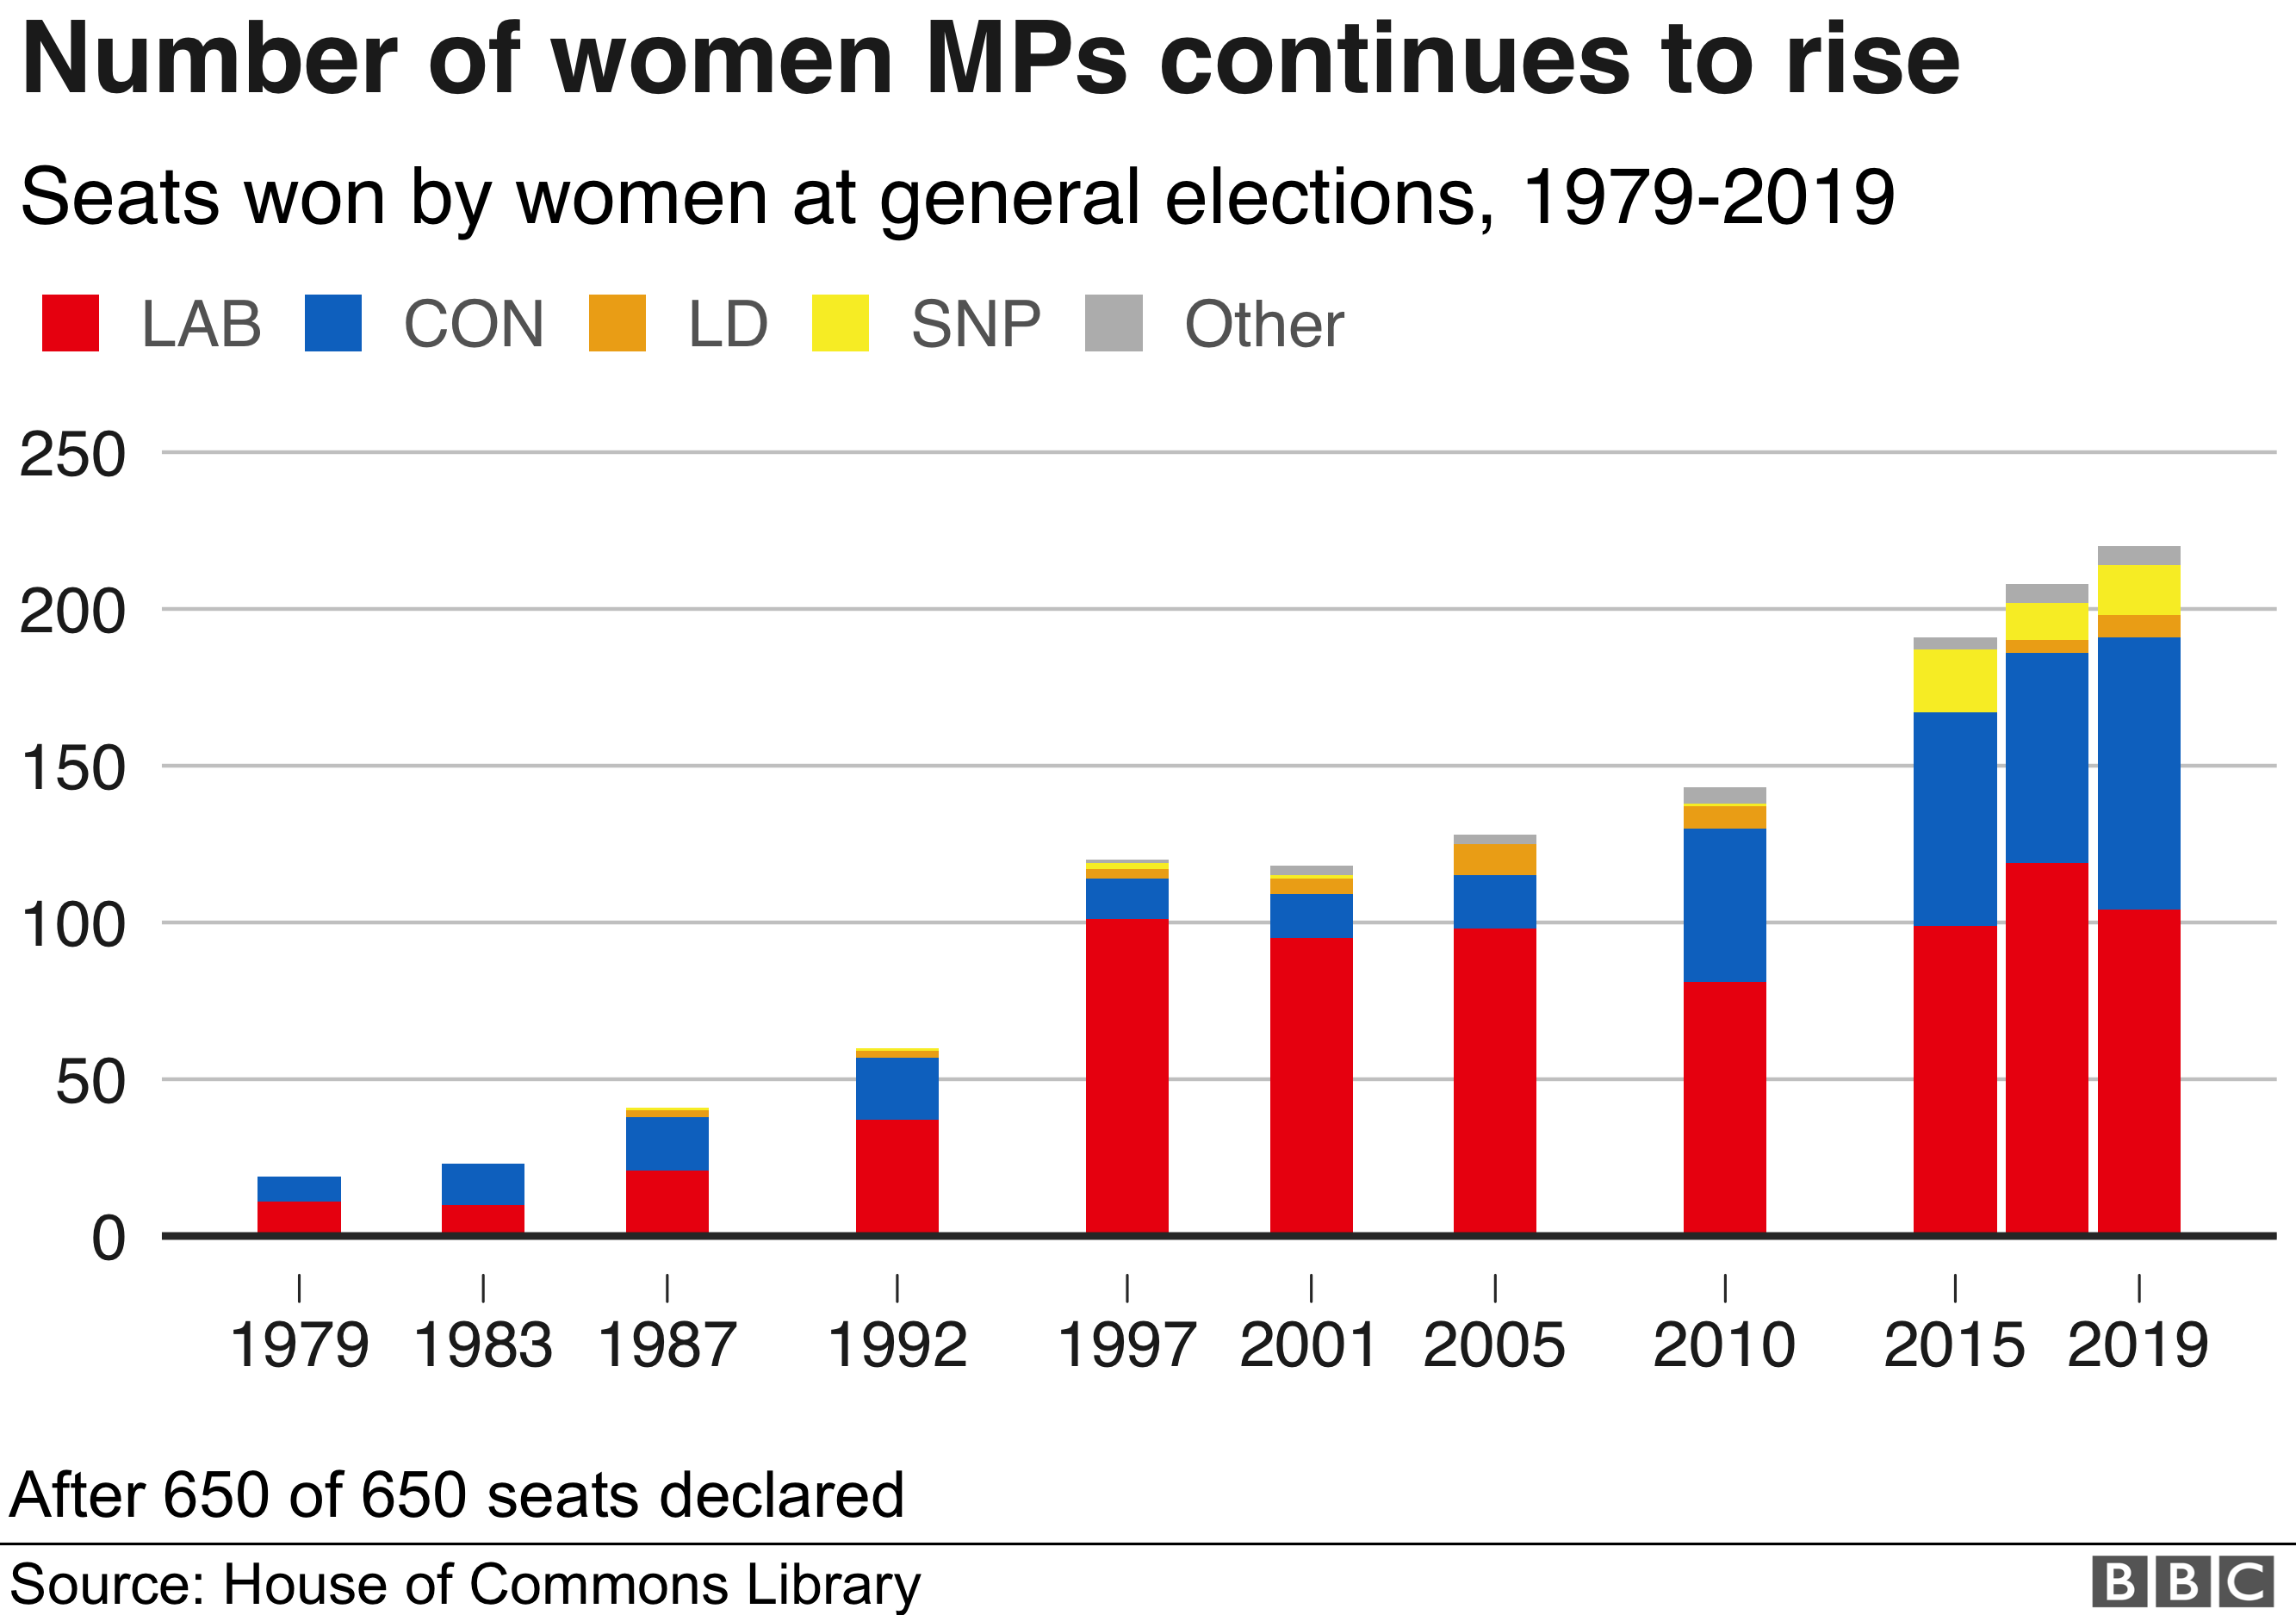 Number of women MPs is rising